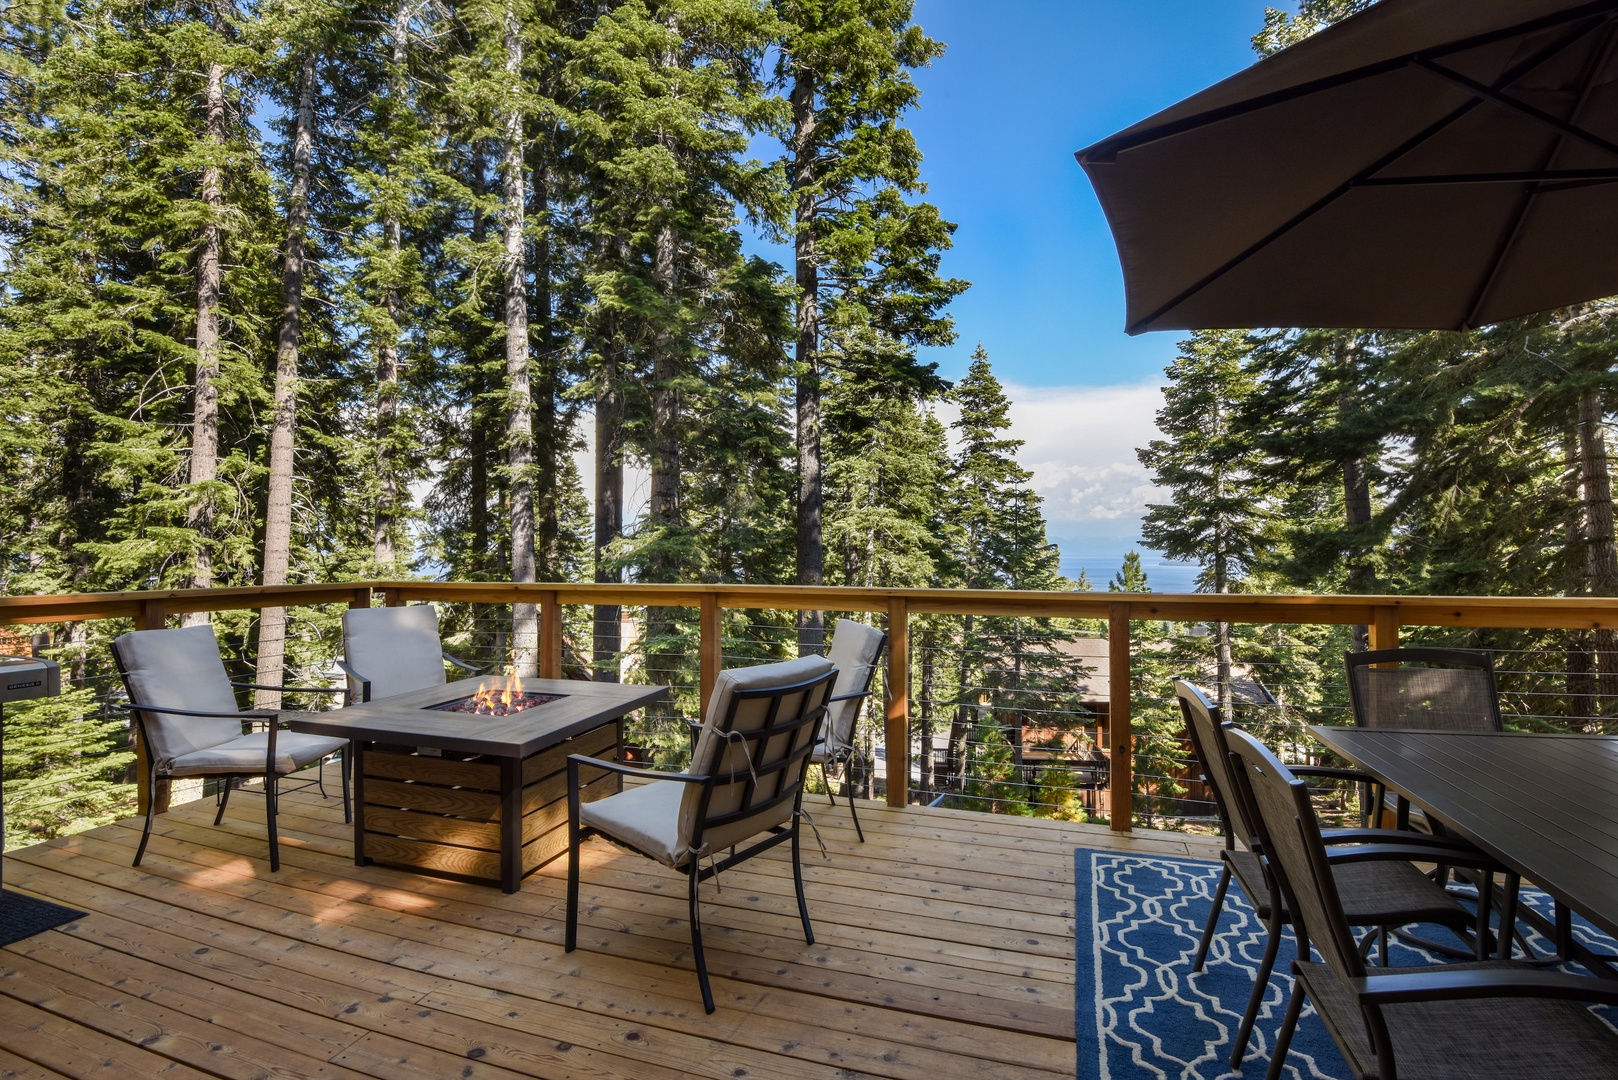 Balcony with BBQ, patio seating, and filtered lake views